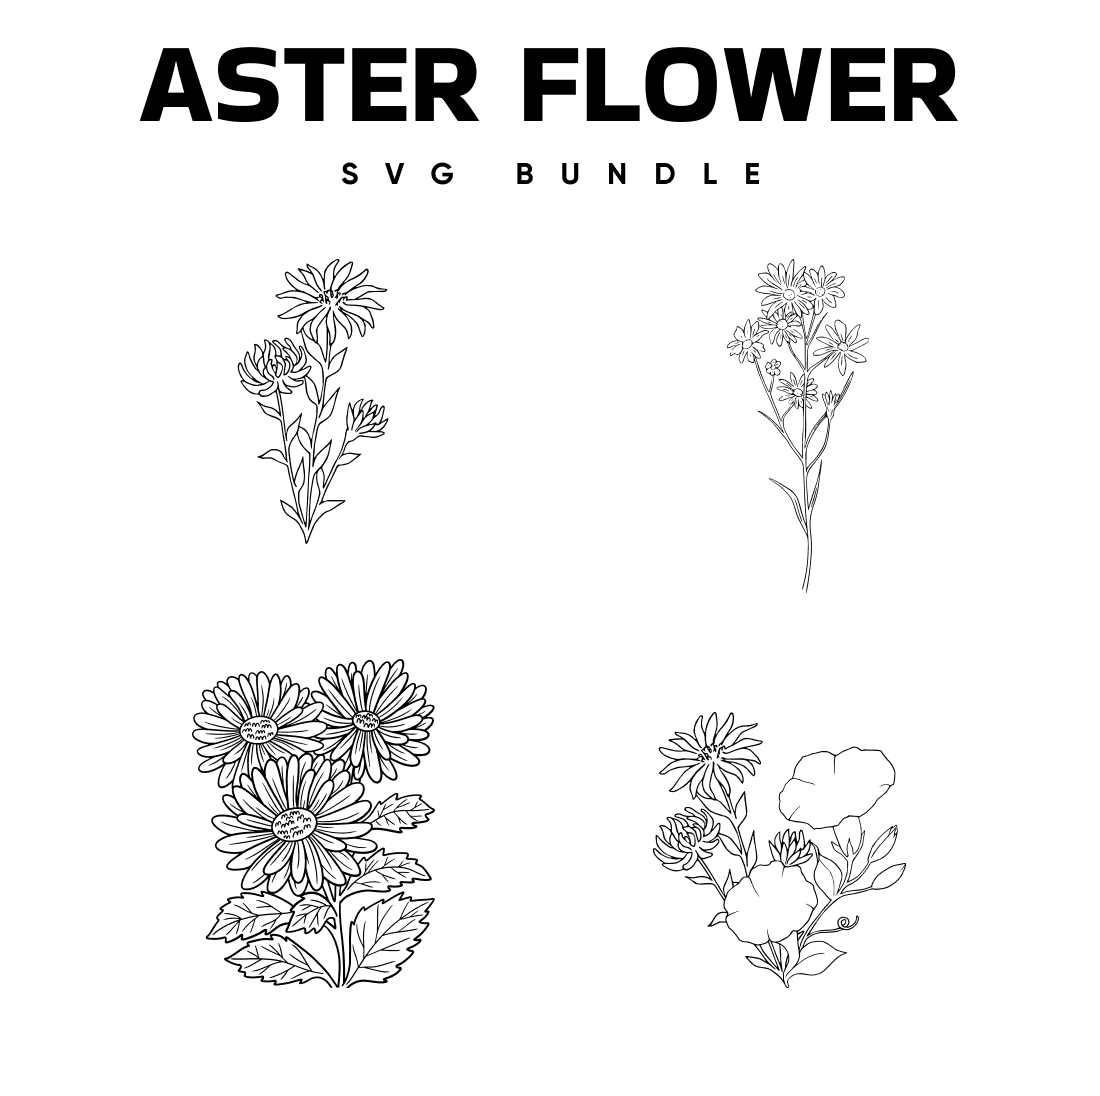 Preview aster flower bundle.